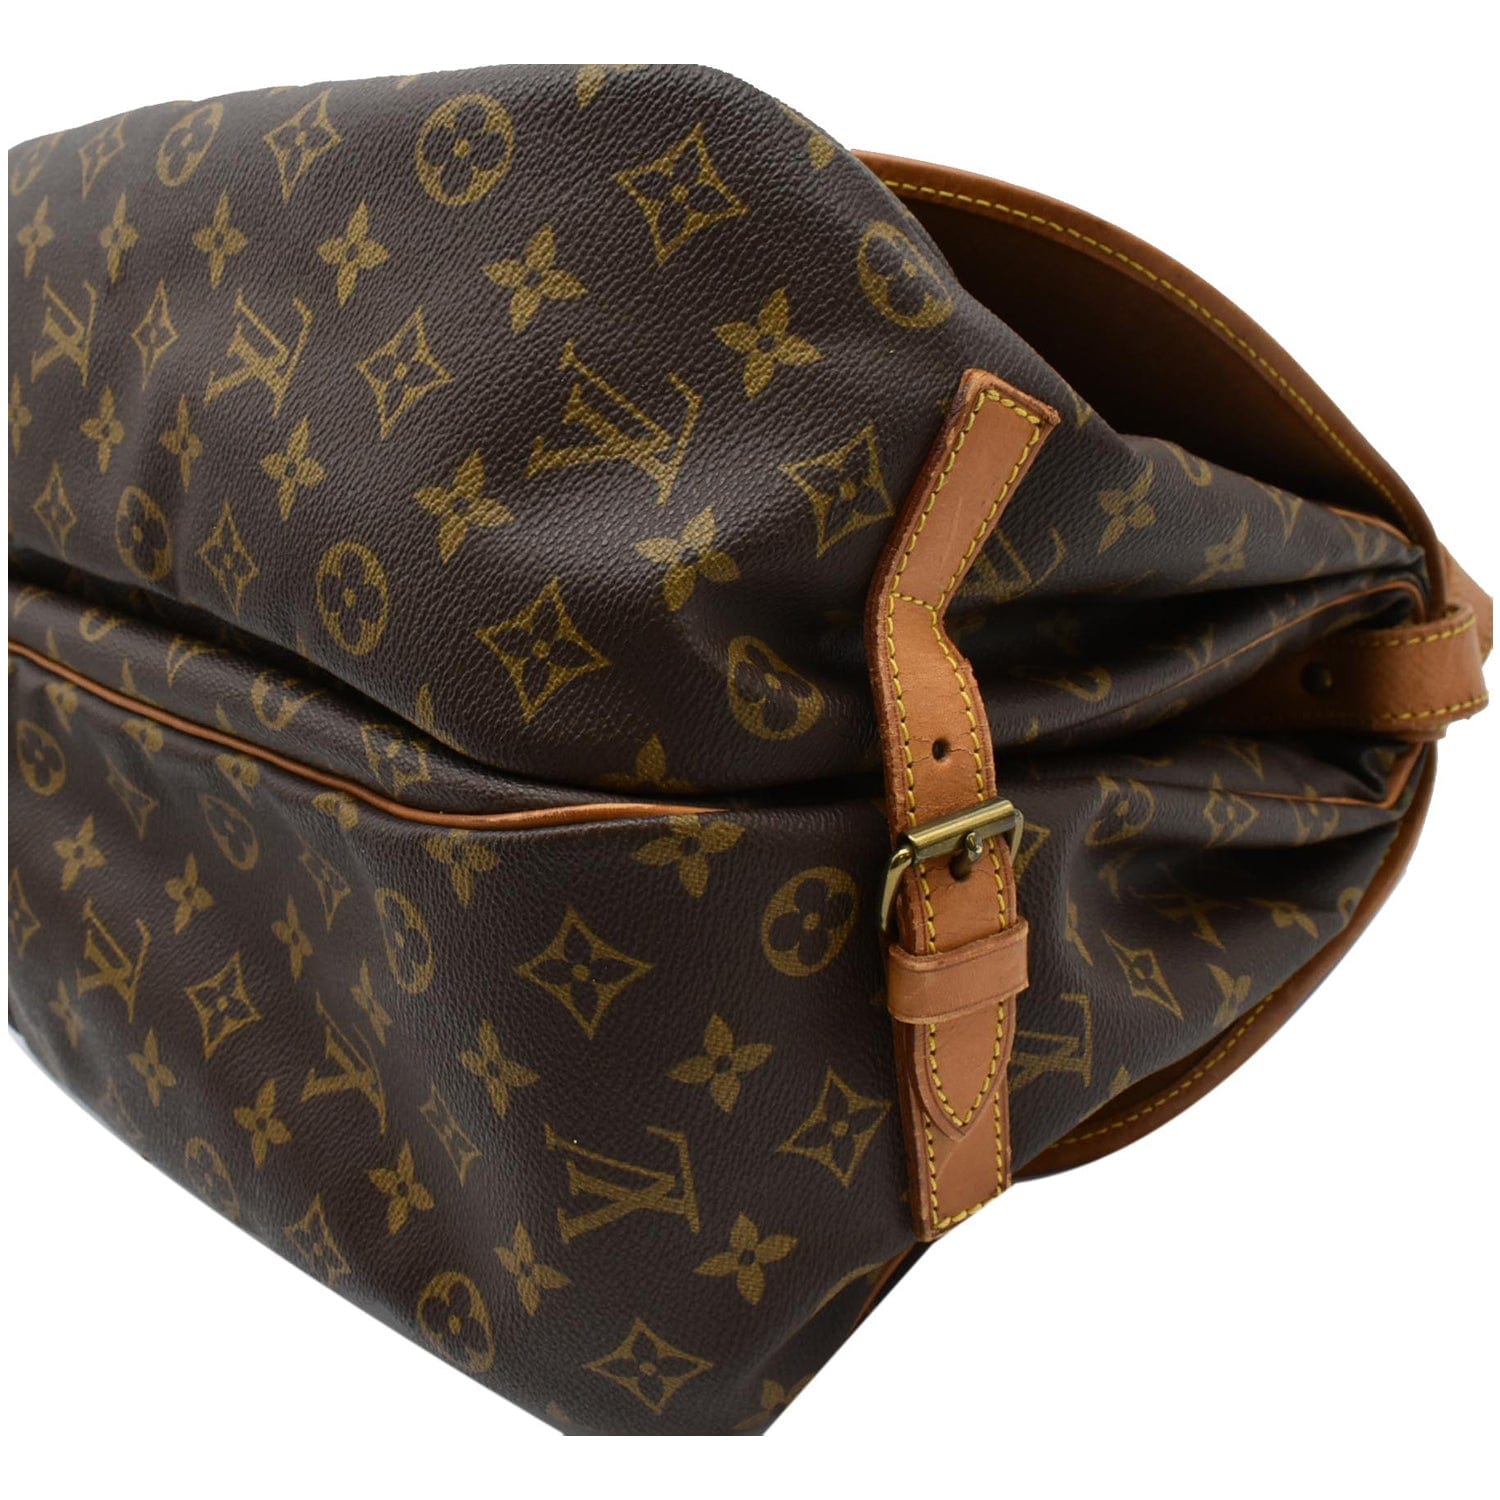 NEW NEW NEW - Saumur BB in MONOGRAM!! Such a cute and practical bag fo, lv saumur bb